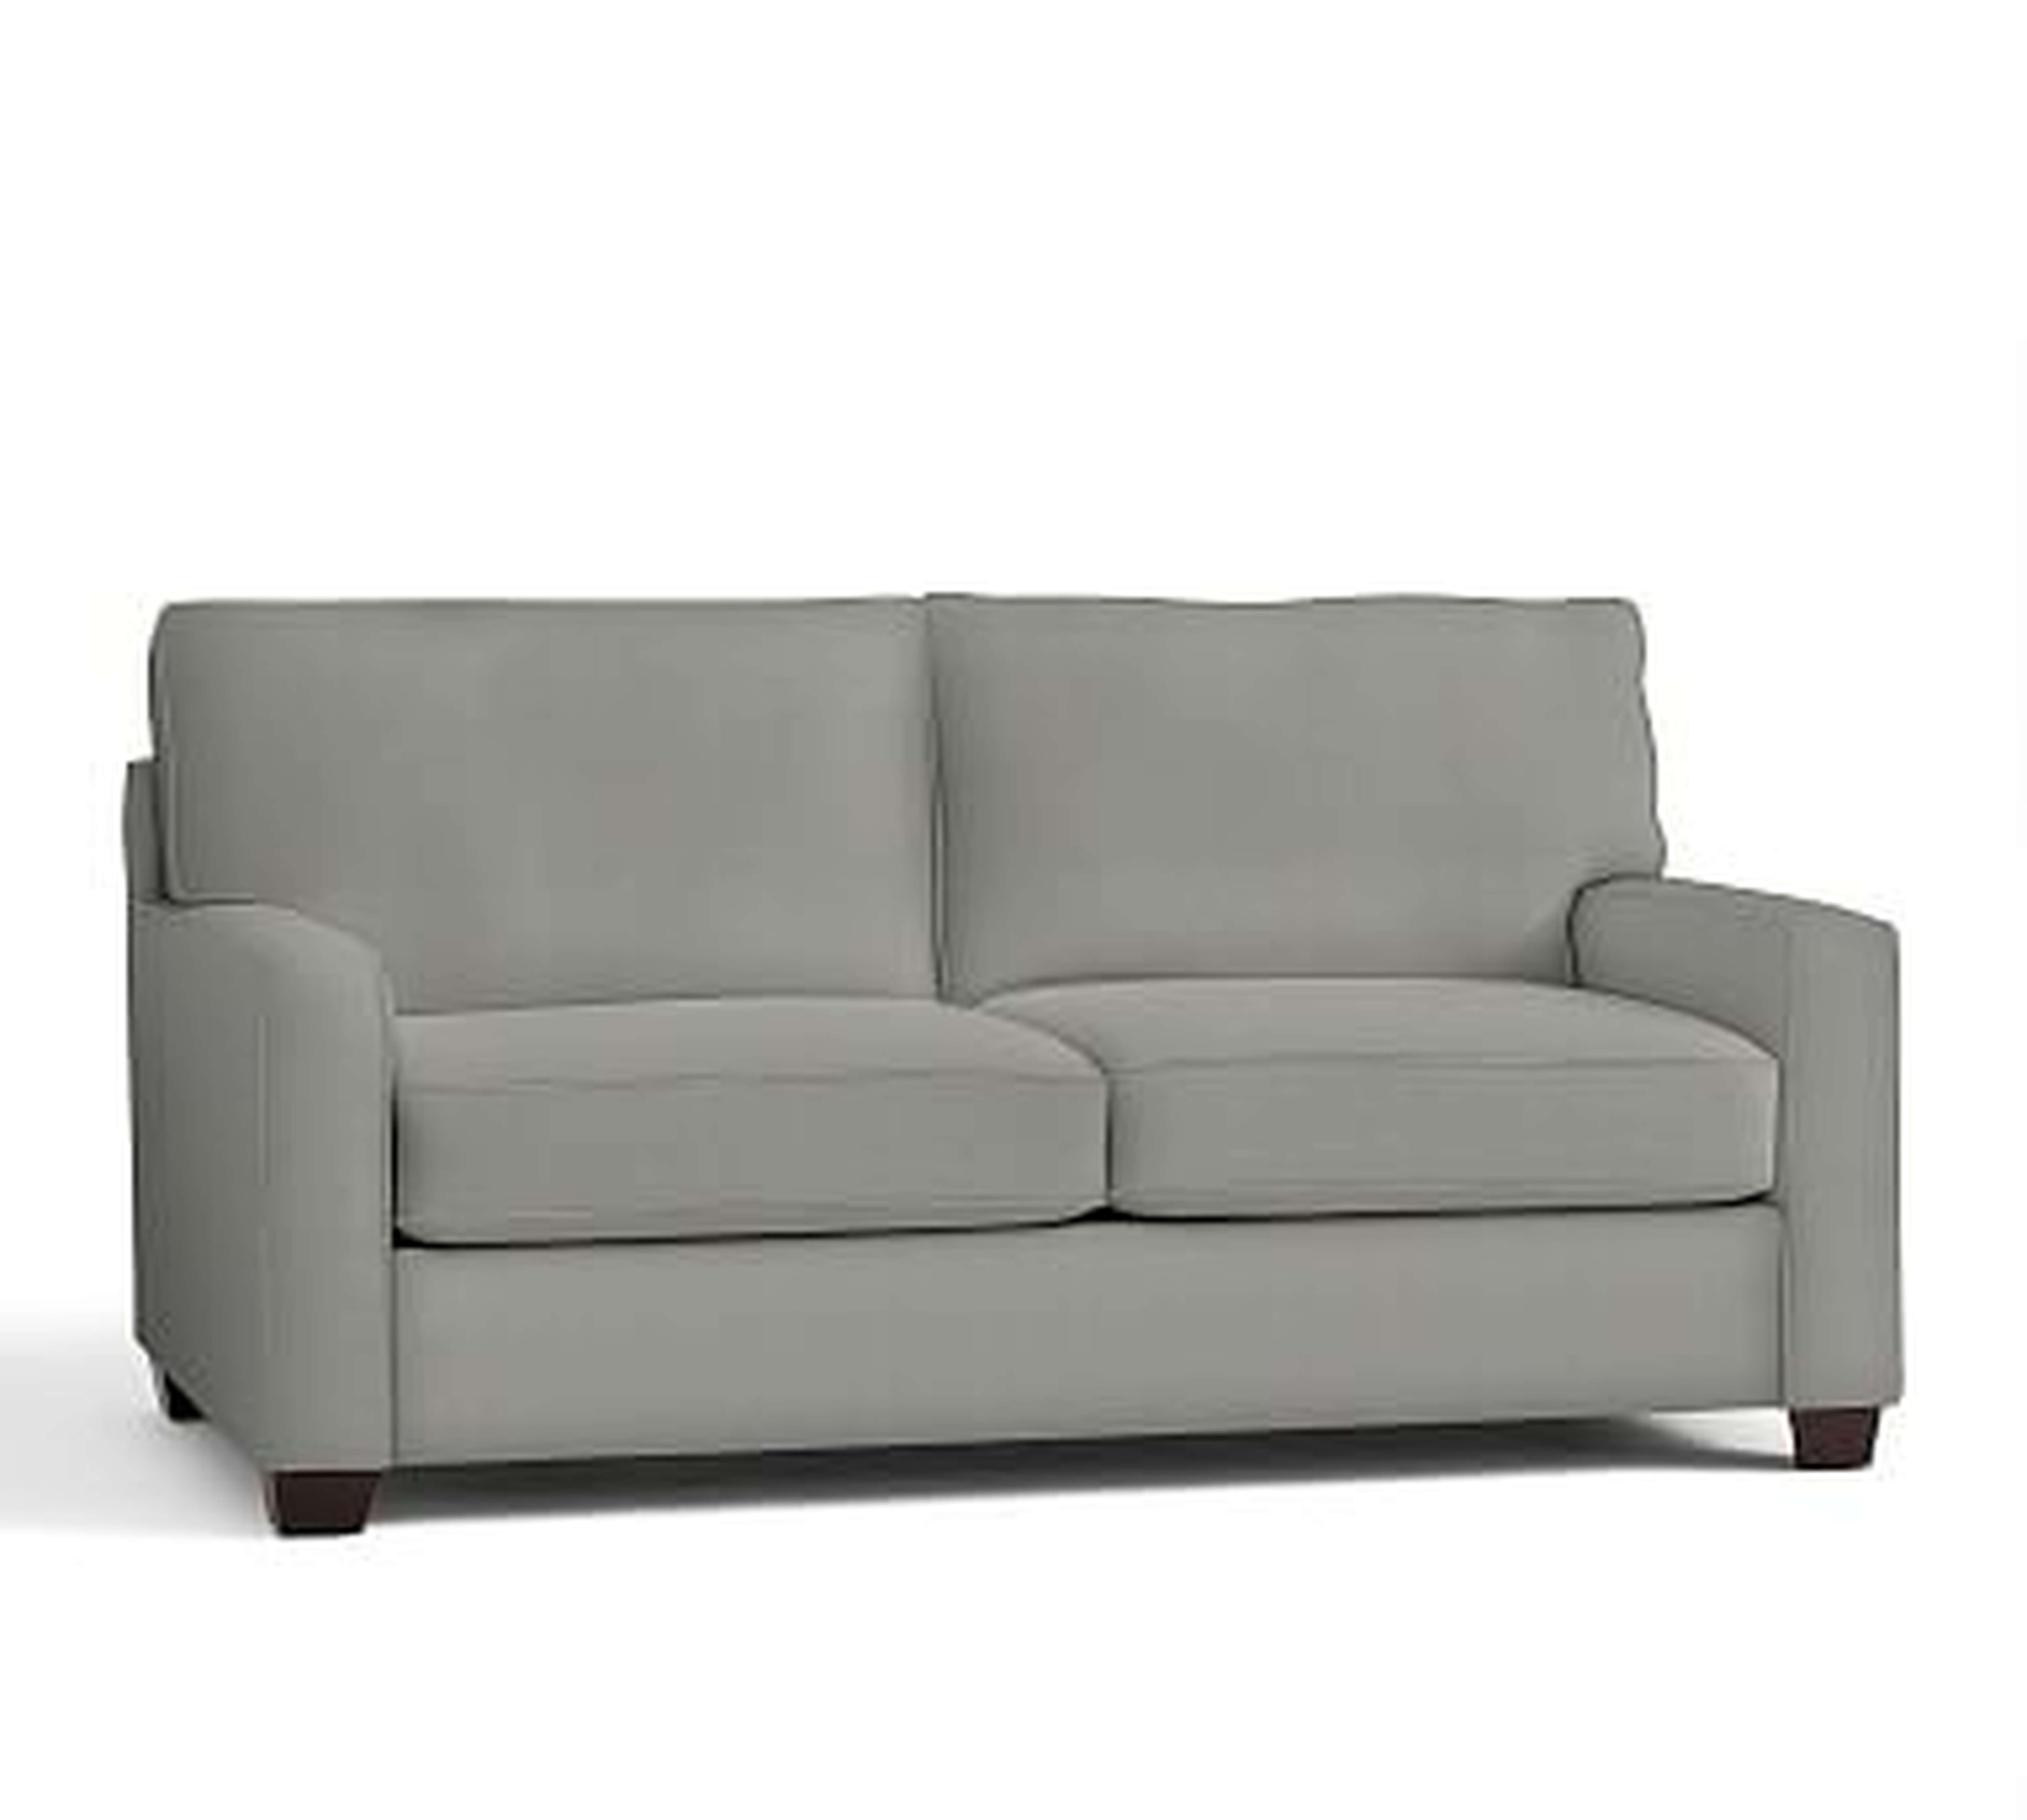 Buchanan Square Arm Upholstered Loveseat 77.5", Polyester Wrapped Cushions, Performance Everydaysuede(TM) Metal Gray - Pottery Barn